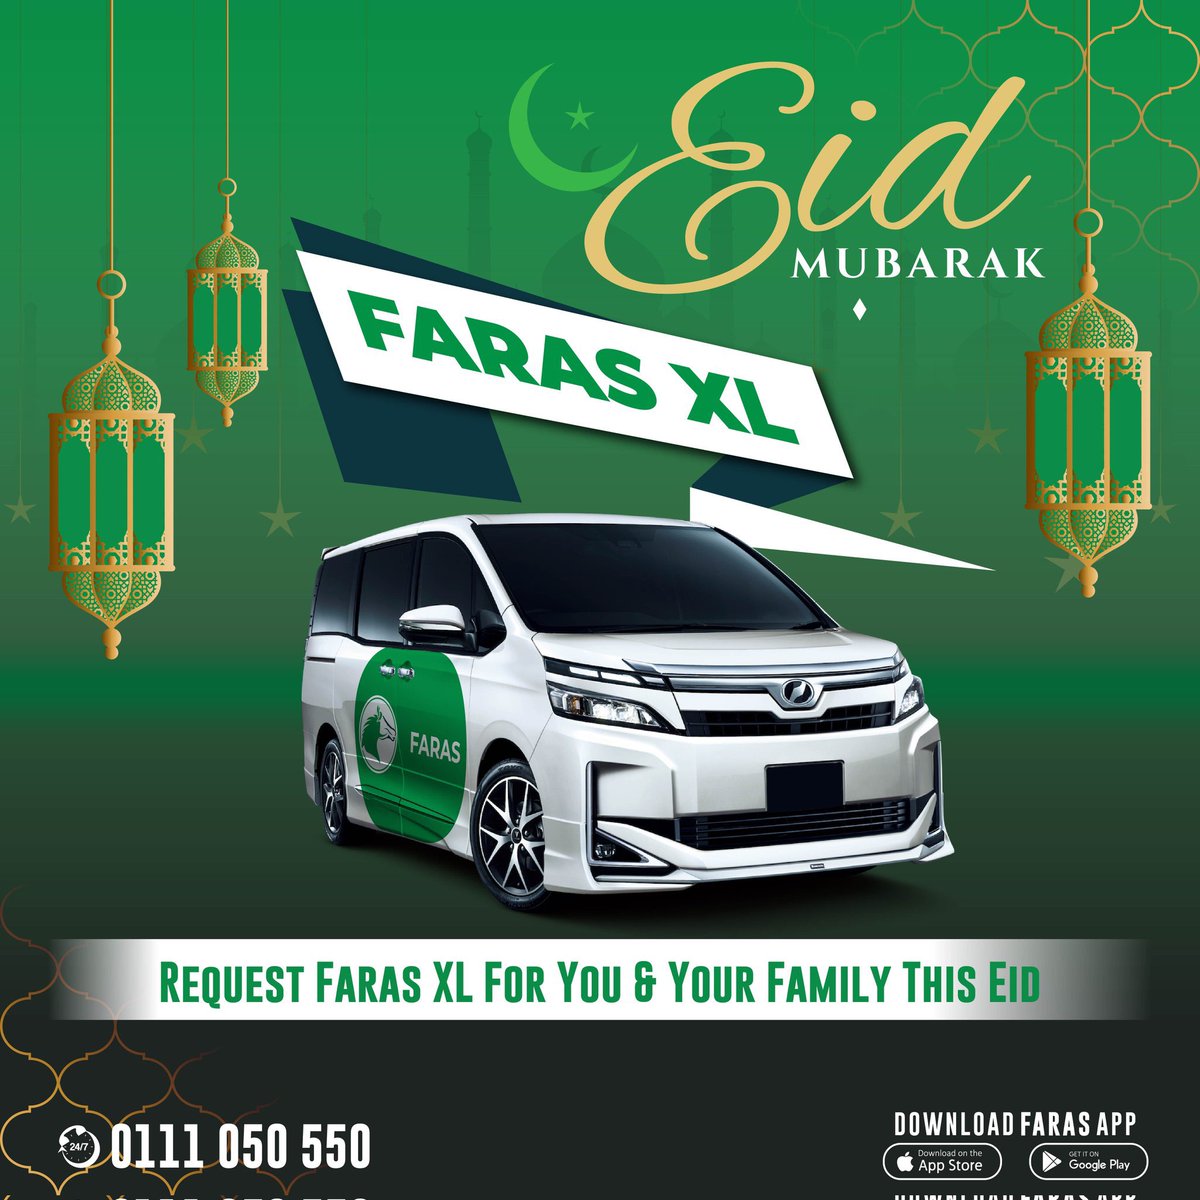 Celebrate this Eid in grand style with Faras Kenya! Enjoy 30% off on every ride with their XL car category. Download the Faras App now using this link: faras.link/faras. Join the #FarasFestivities to make this Eid unforgettable!